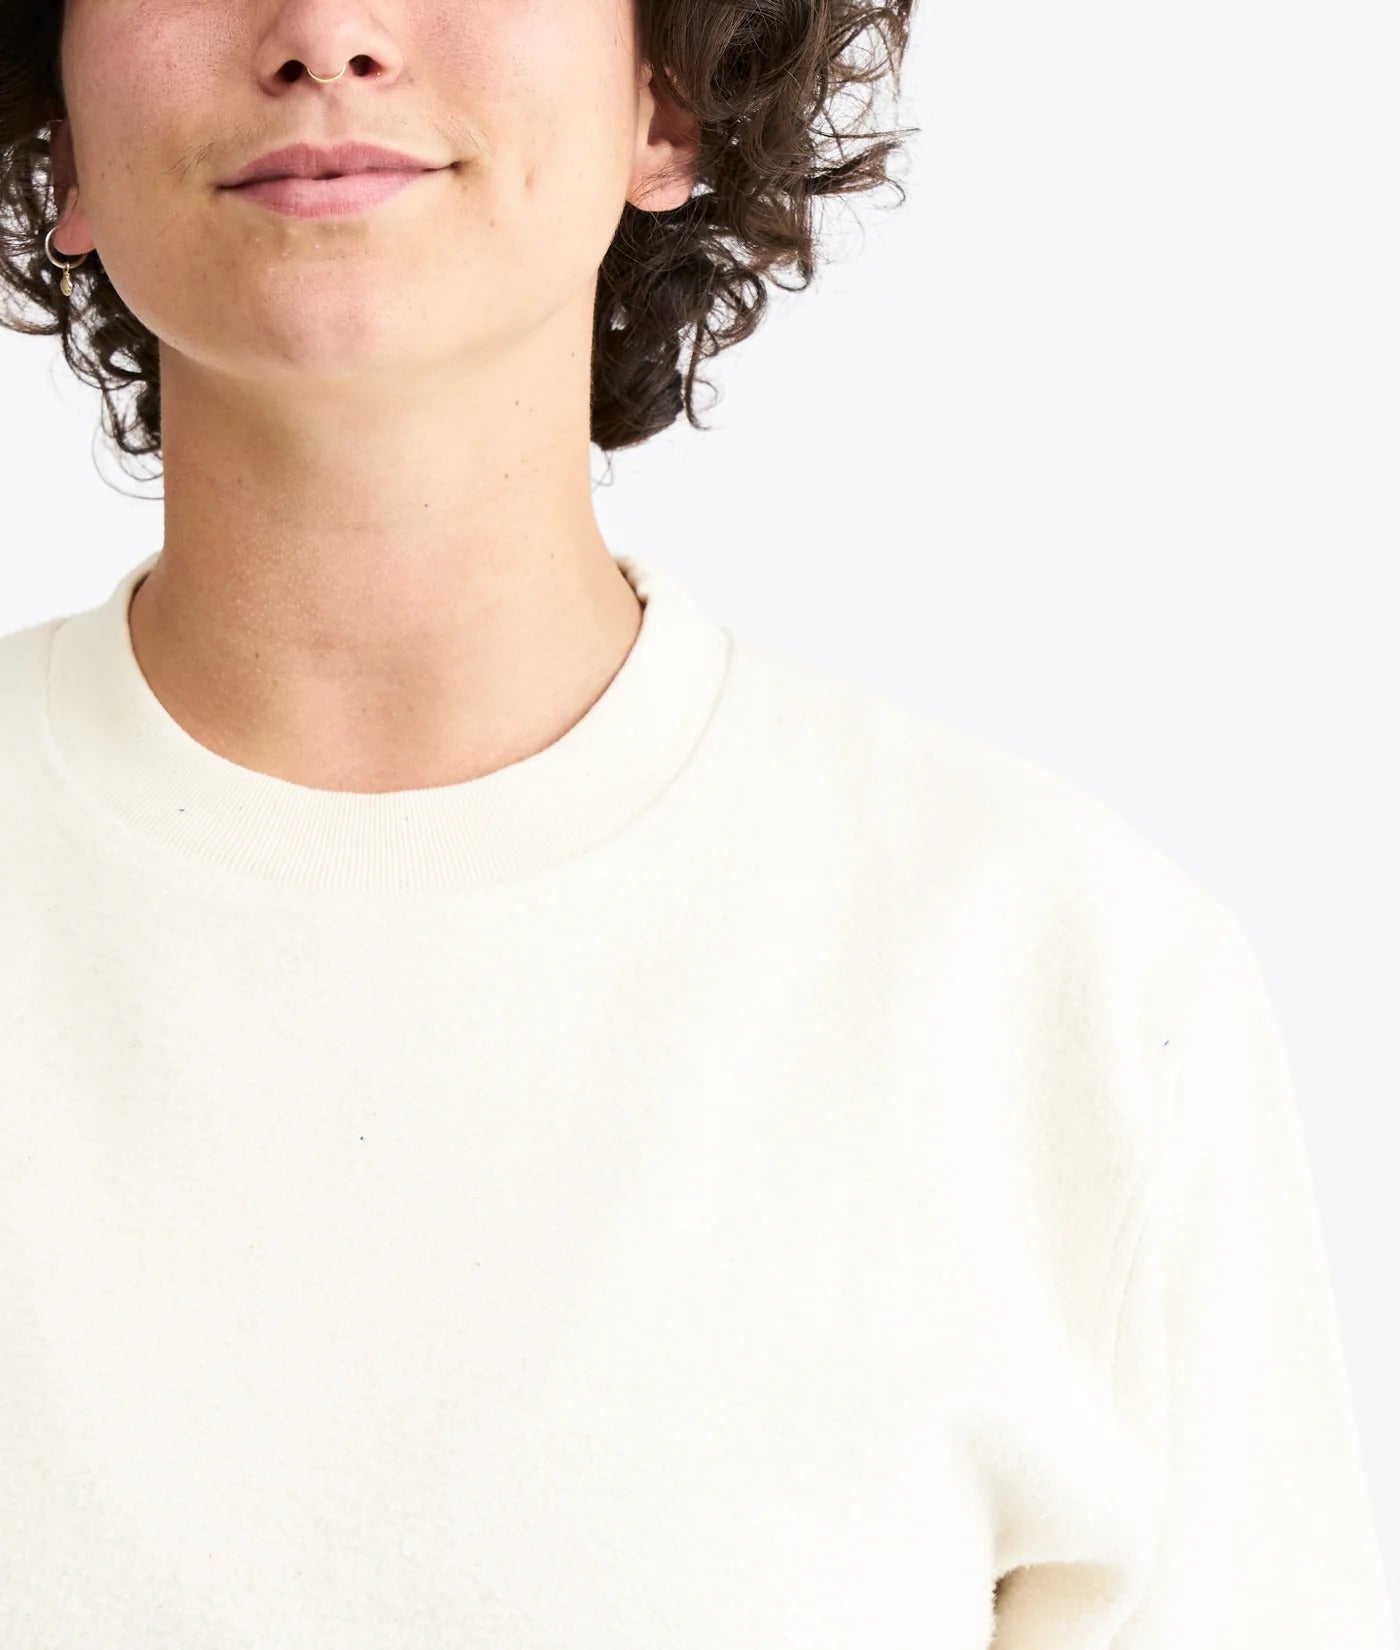 – Pullover Industry Reversed Nations - of All Sweatshirt